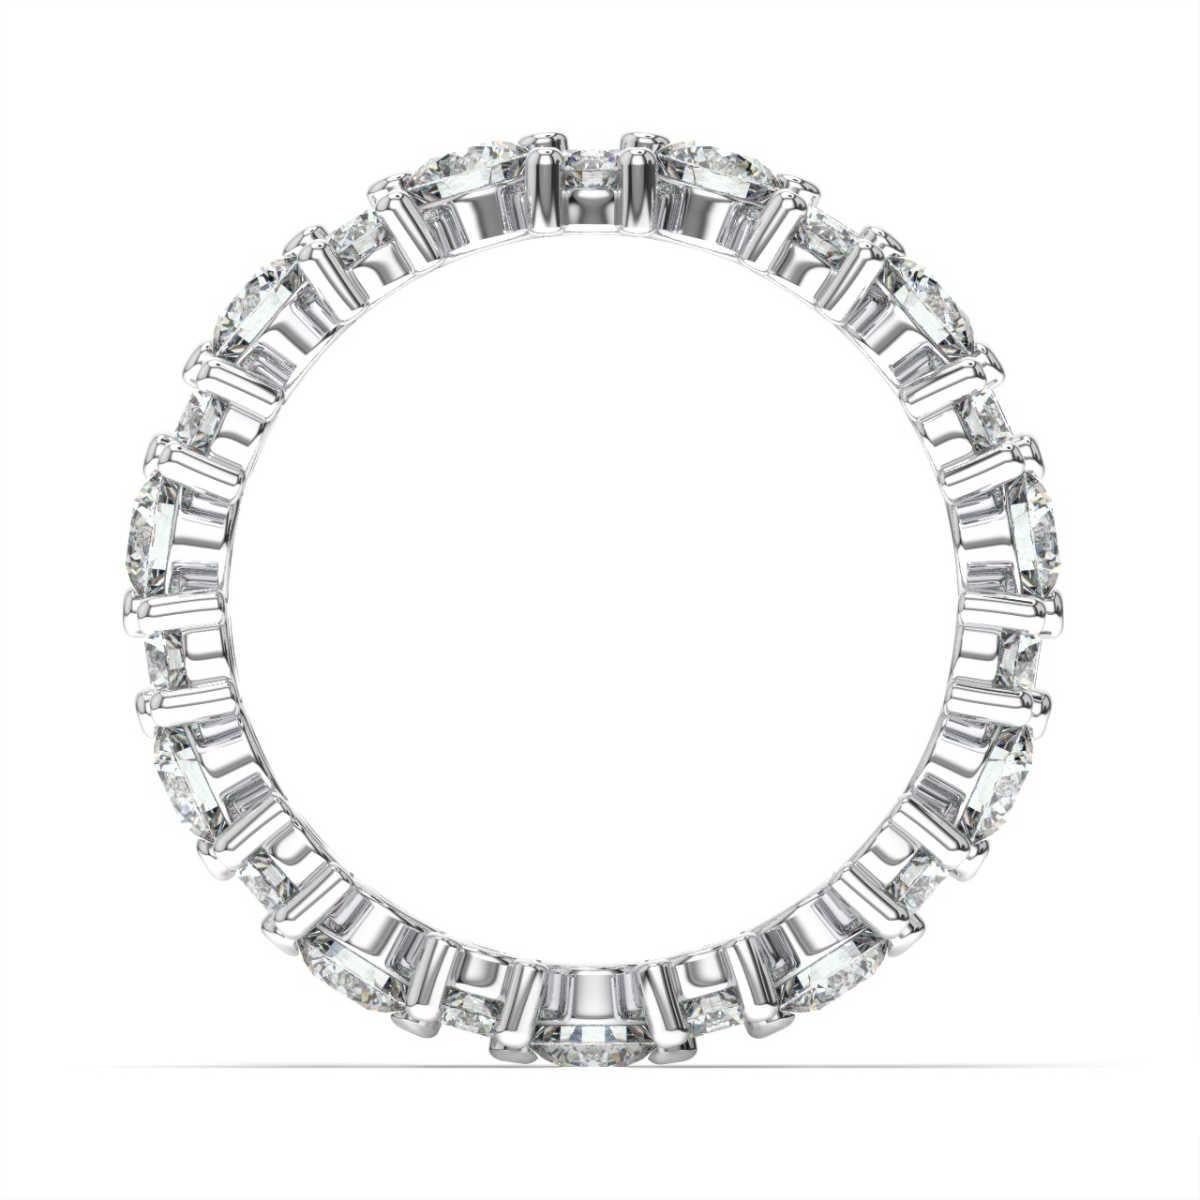 This eternity ring features a perfectly matched round brilliant diamonds set in a delicate prong. Experience the difference!

Product details: 

Center Gemstone Color: WHITE
Side Gemstone Type: NATURAL DIAMOND
Side Gemstone Shape: ROUND
Metal: